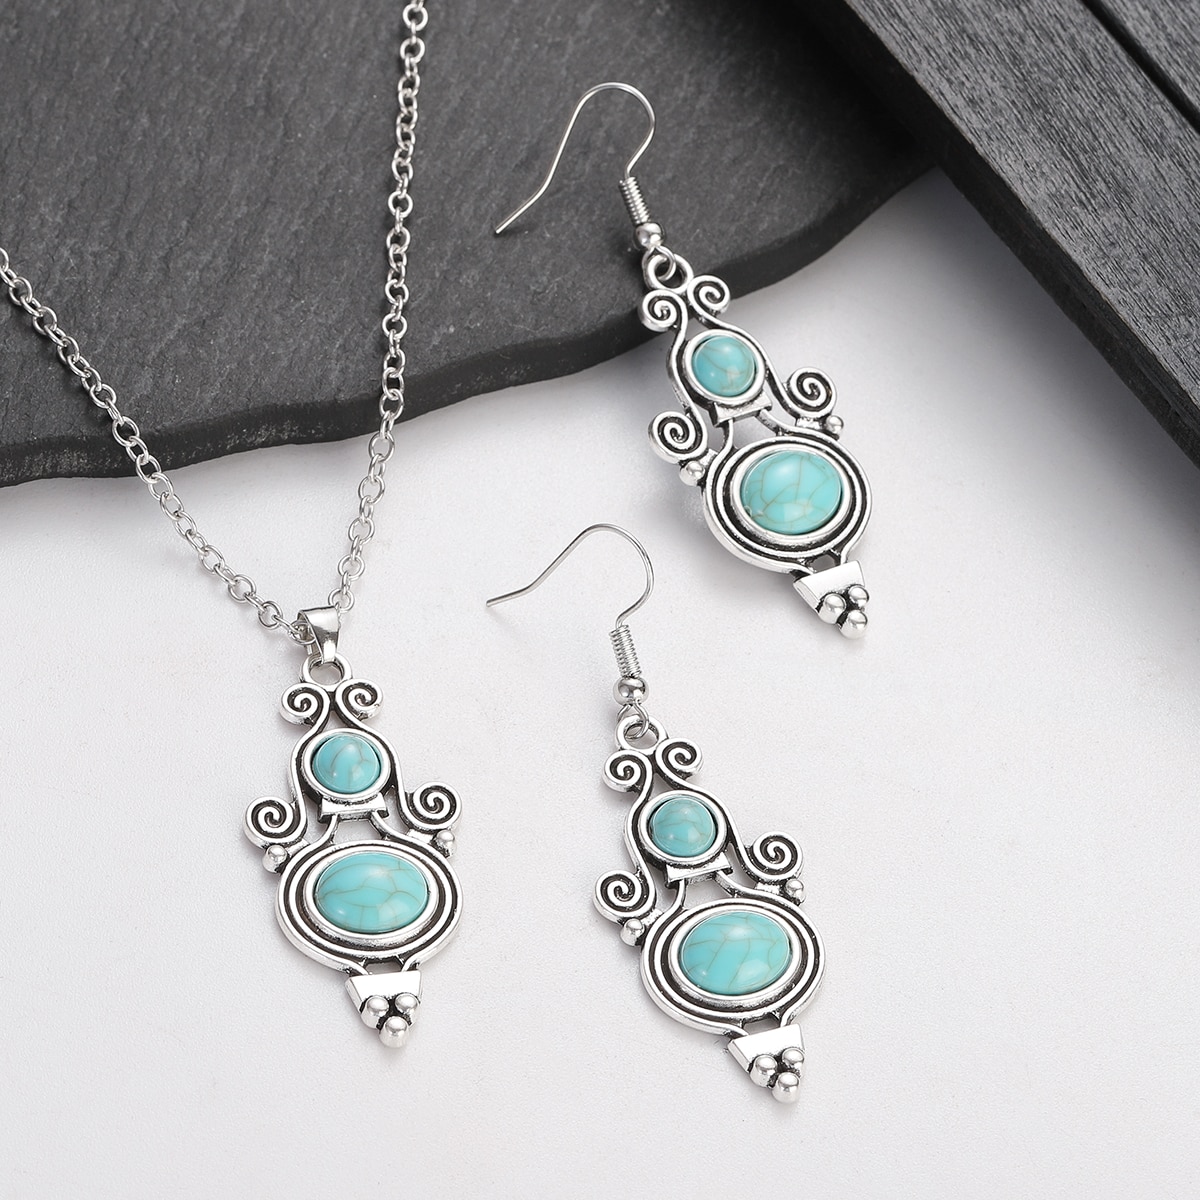 Ethnic-Boho-Red-Blue-Stone-Pendant-Necklace-Earring-Set-Women-Girls-Silver-Color-Geometric-Jewelry-S-1005004921122202-6